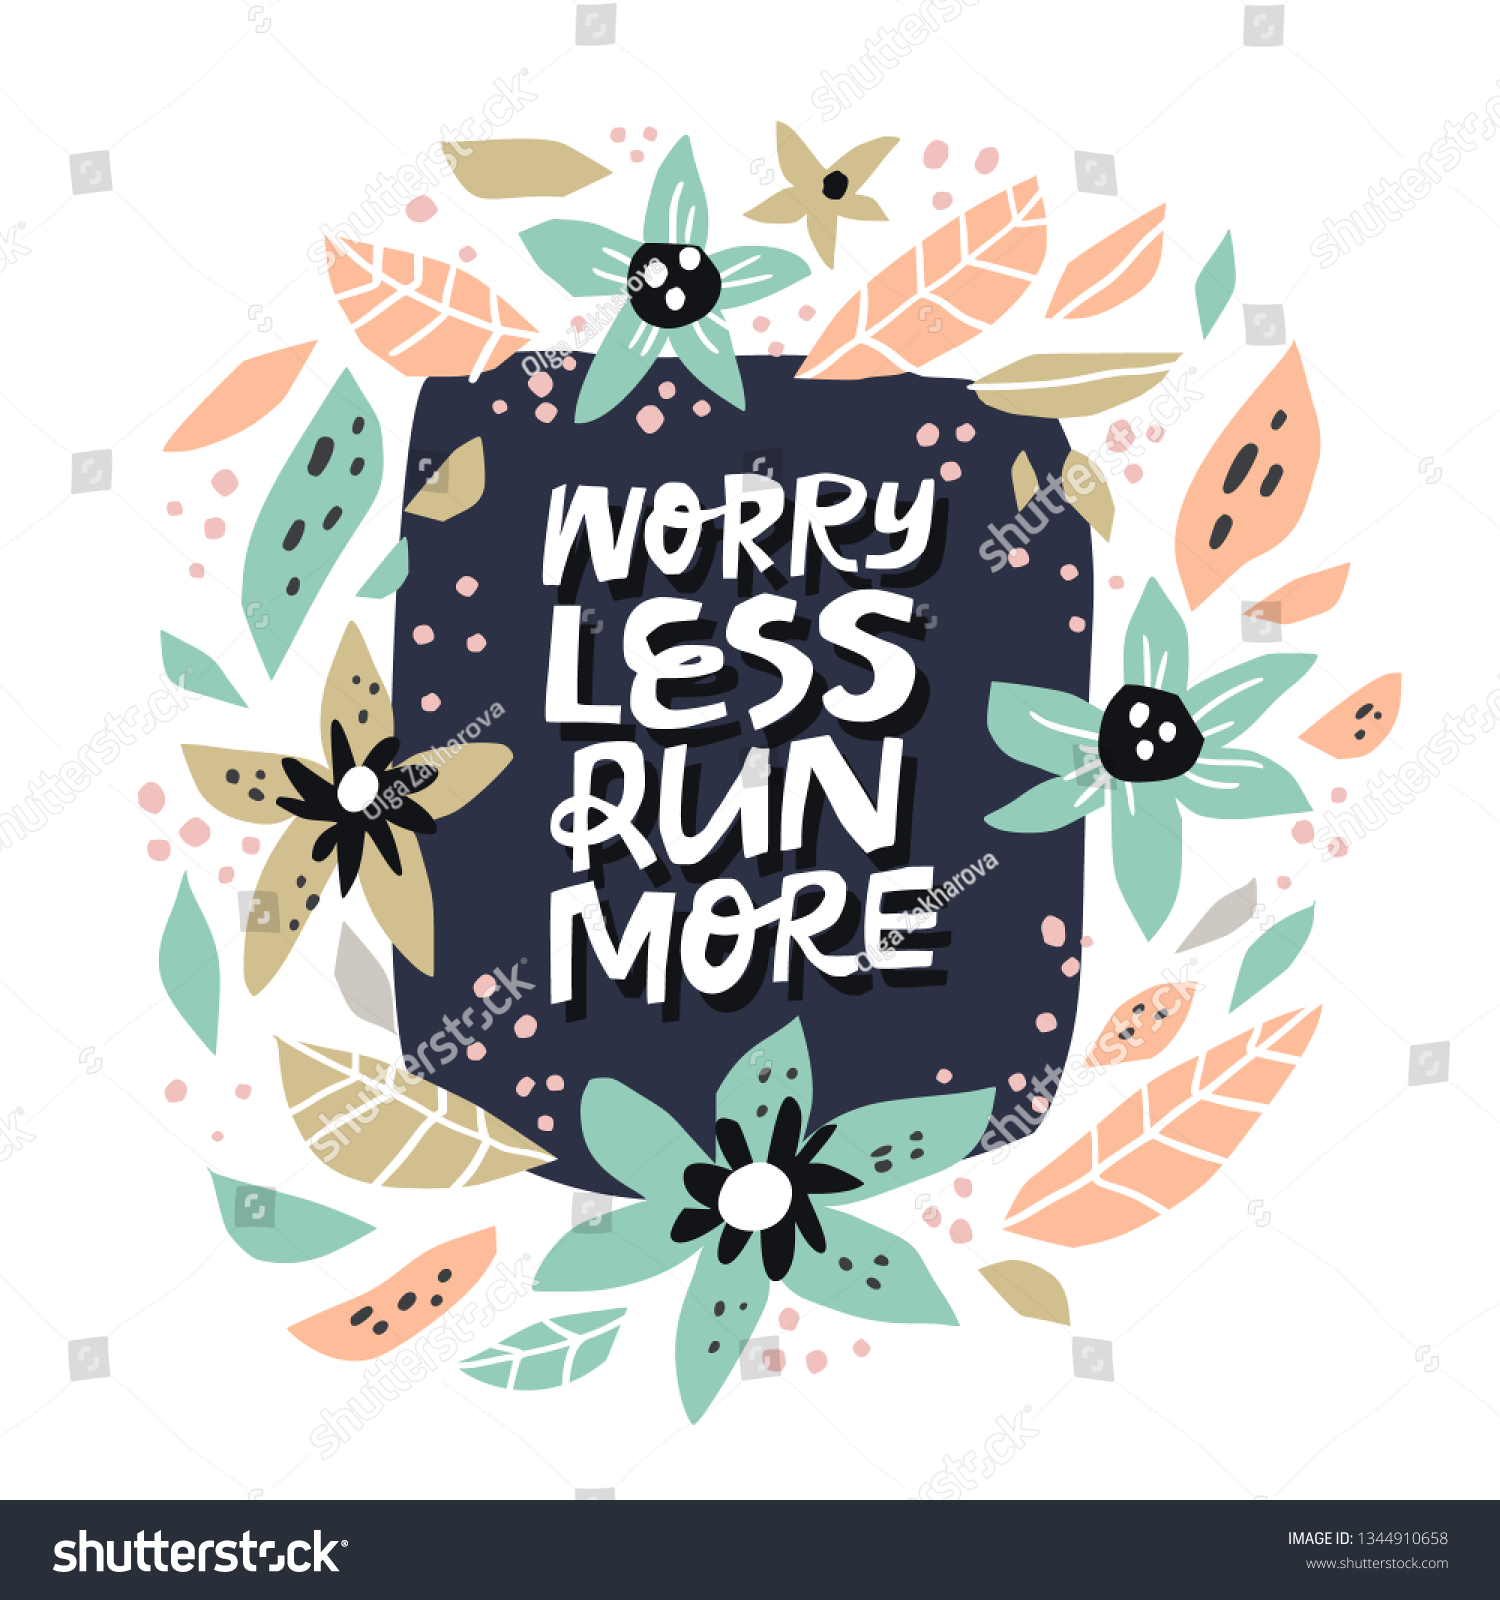 SVG of Motivational inscription with abstract flowers. Worry less run more hand drawn lettering in round floral frame. Inspiring fitness slogan sketch drawing. Circle border with bloom and phrase composition svg